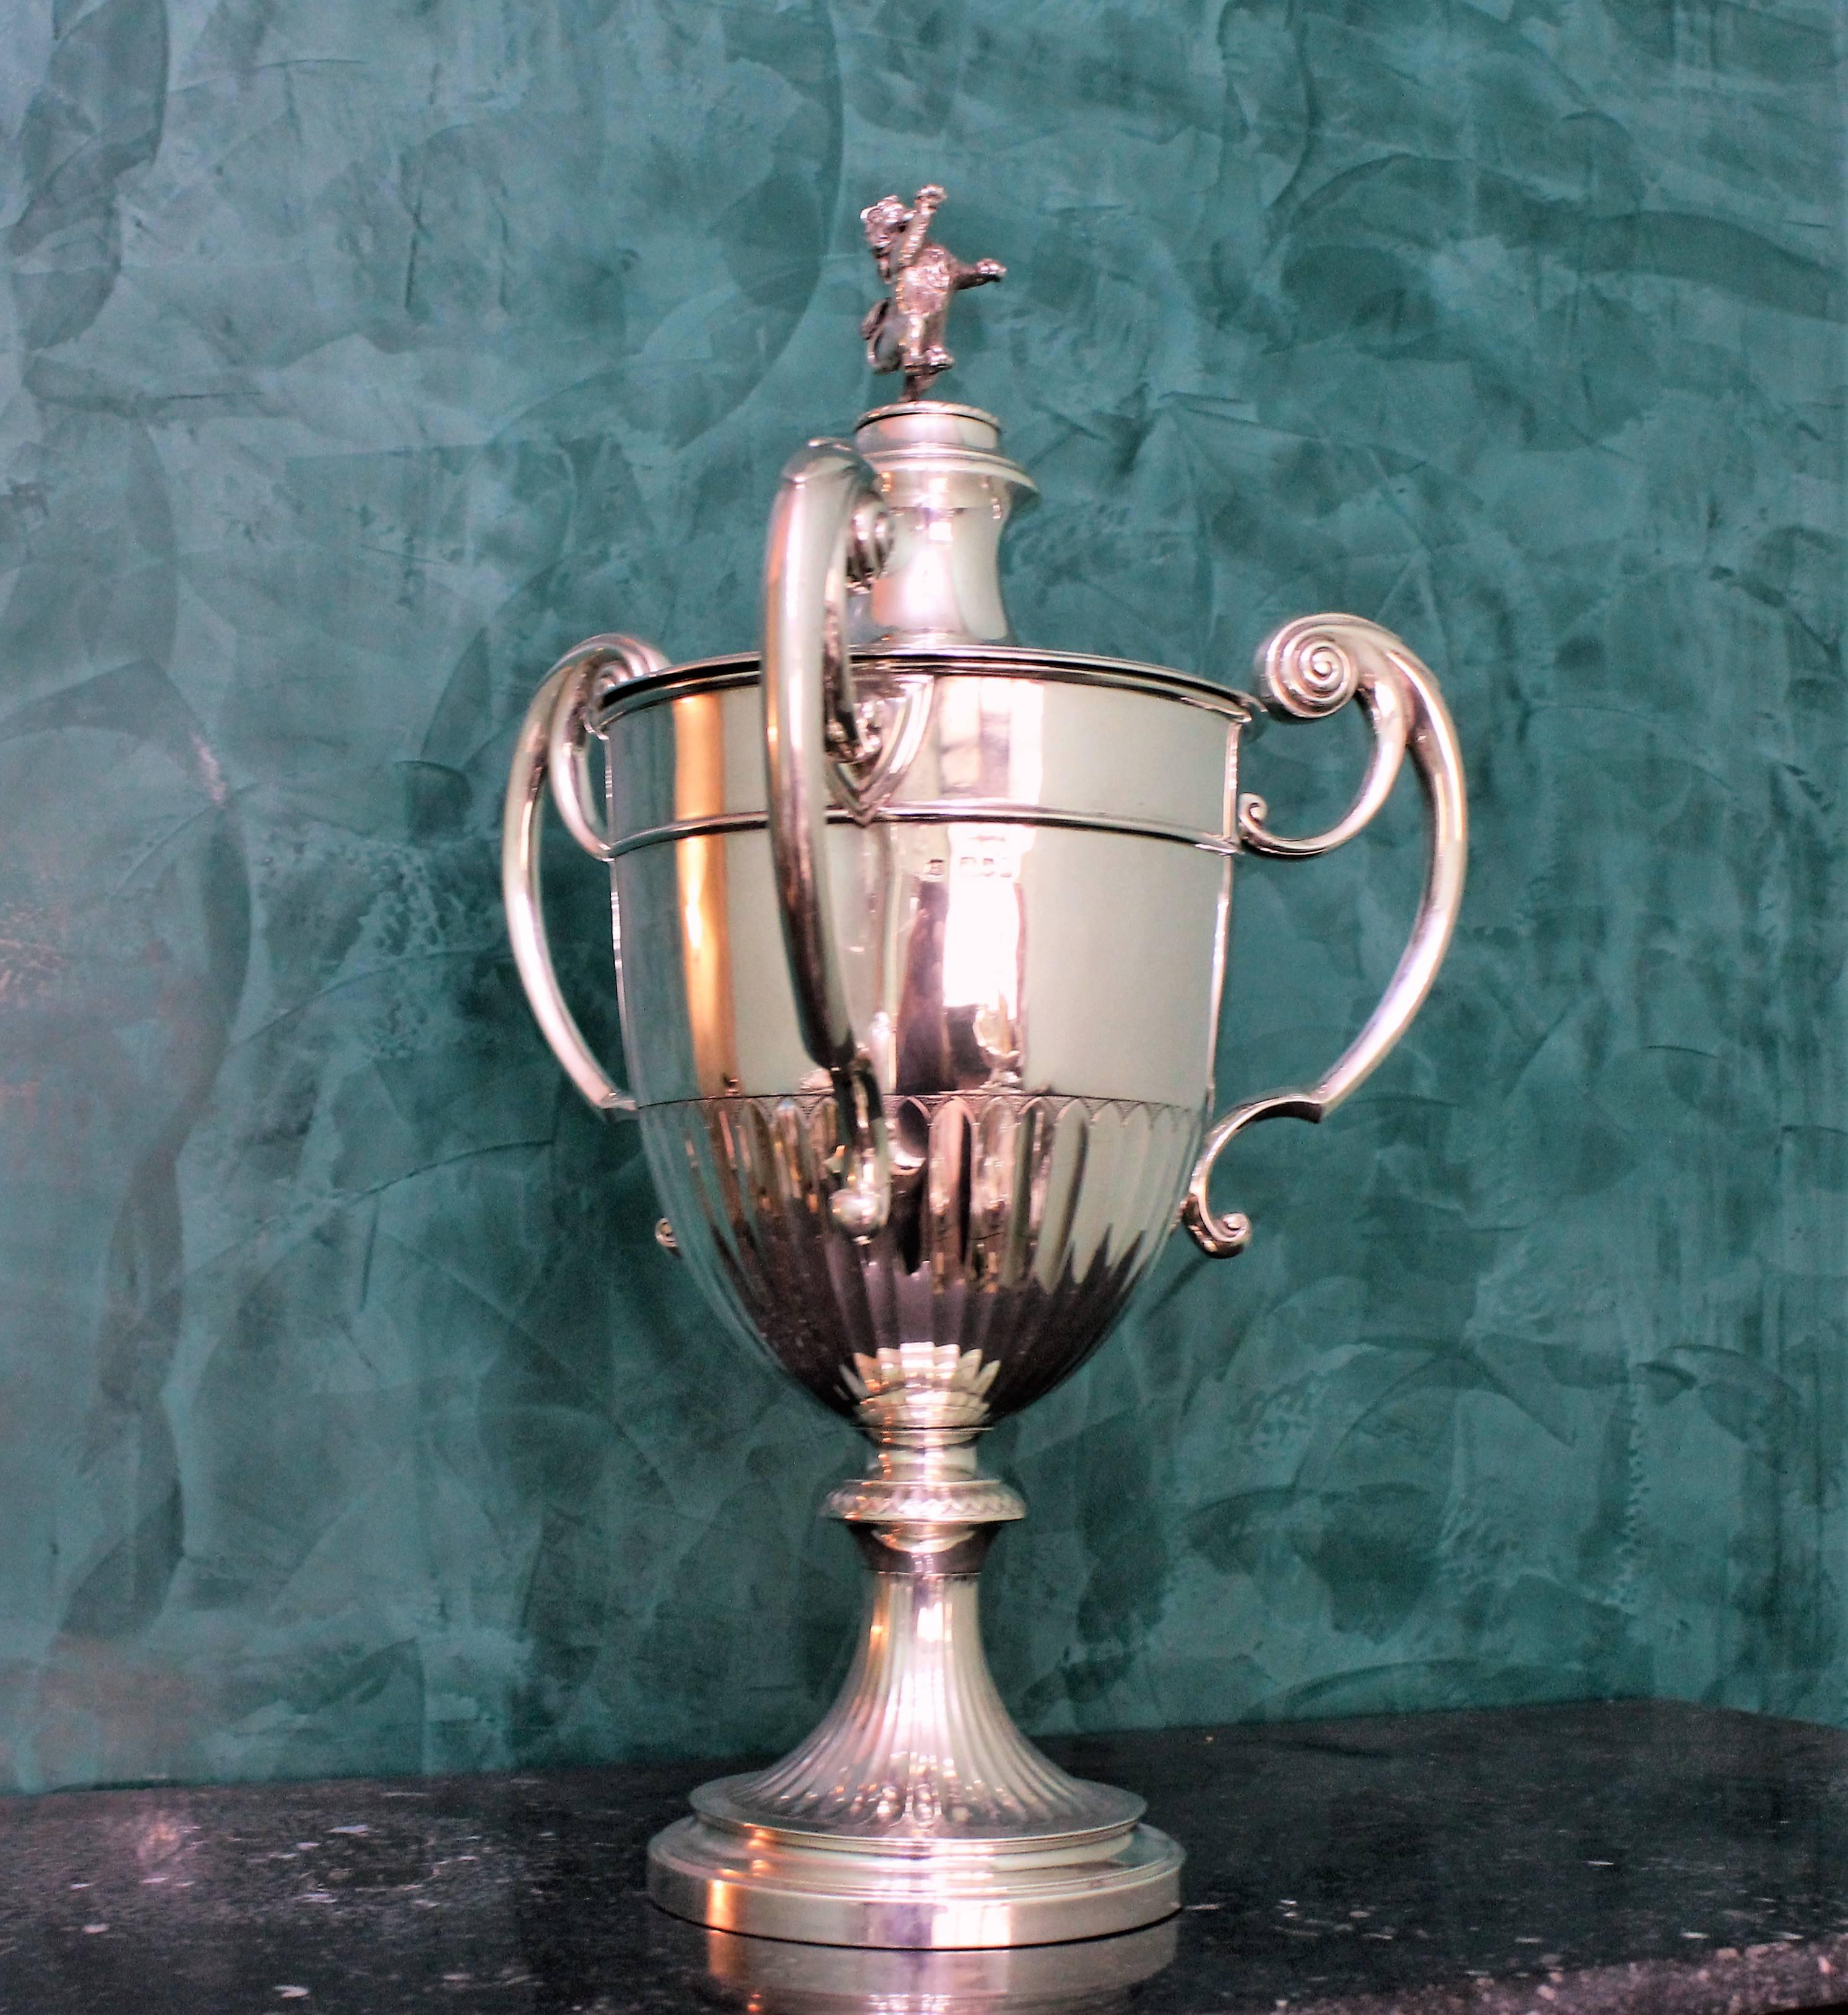 Silver cup/trophy with three handles and lion sculpture on top, realized by Goldsmiths & Silversmiths CO by William Gibson & John Lawrence Langman - London, England
Goldsmiths & Silversmiths Co (William Gibson & John Lawrence Langman)
Hallmarks